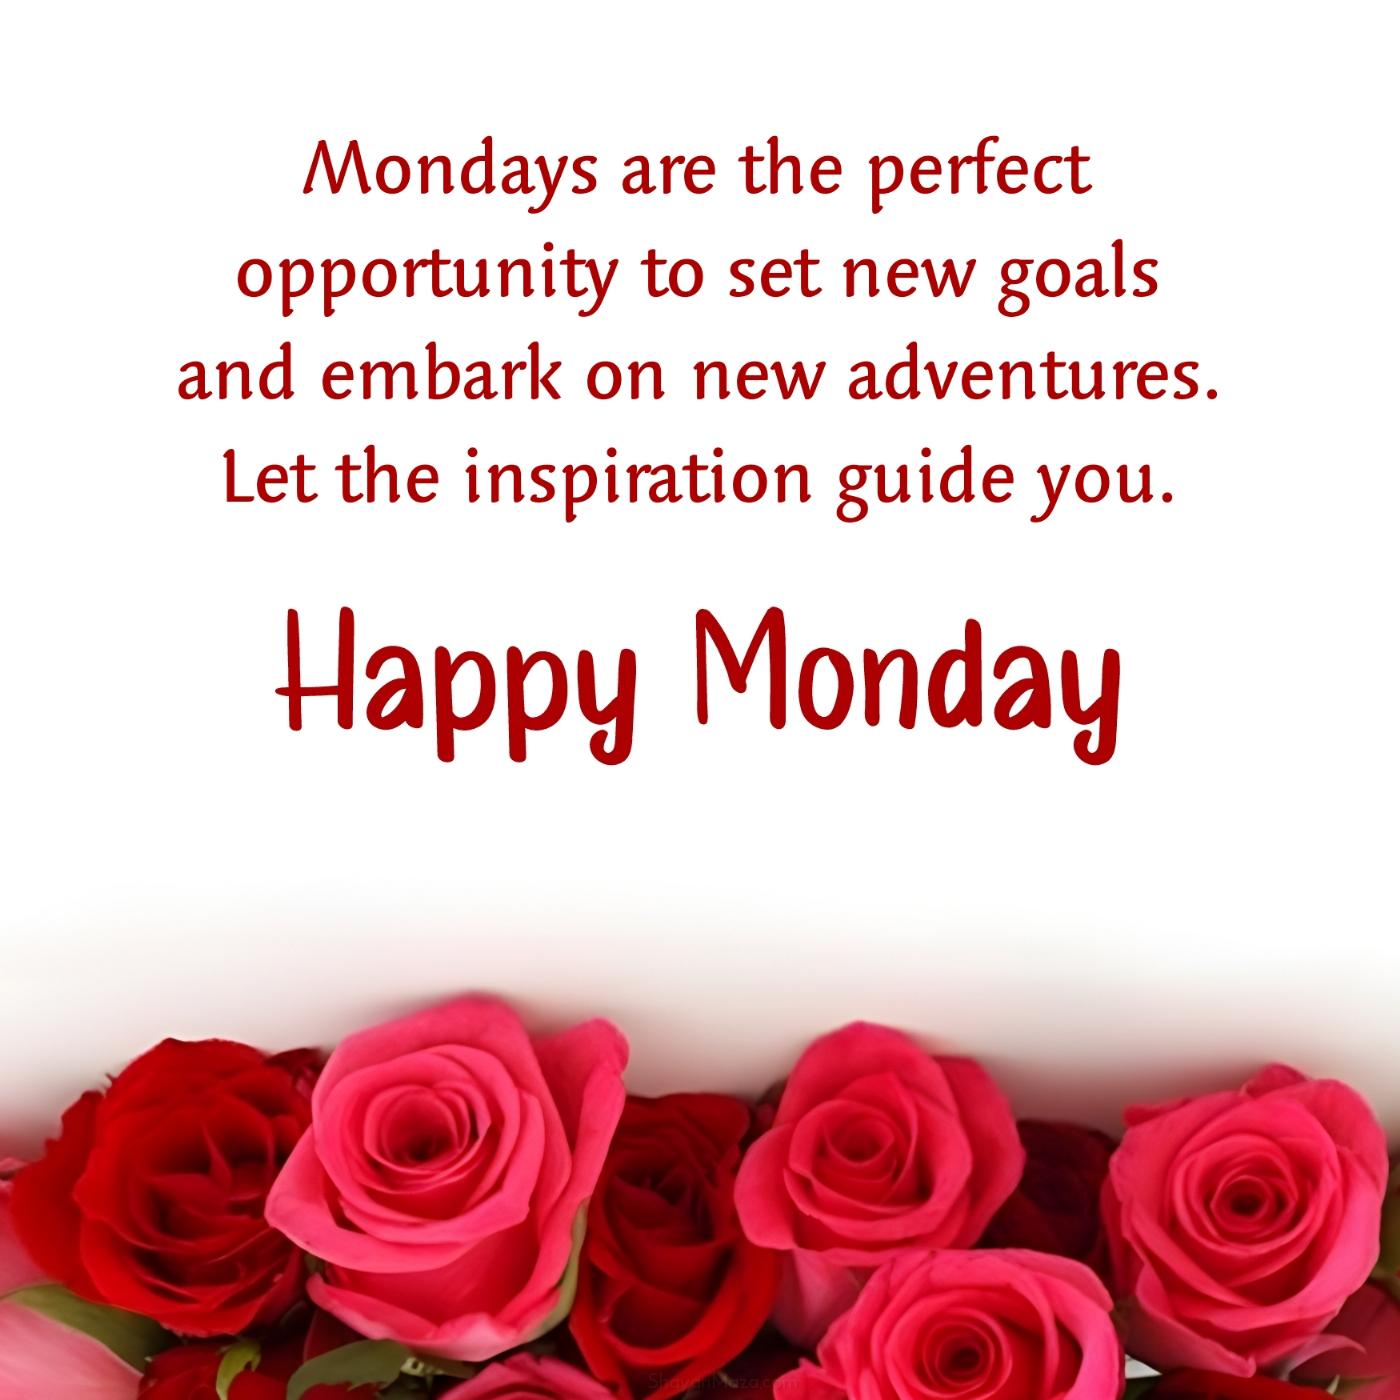 Mondays are the perfect opportunity to set new goals